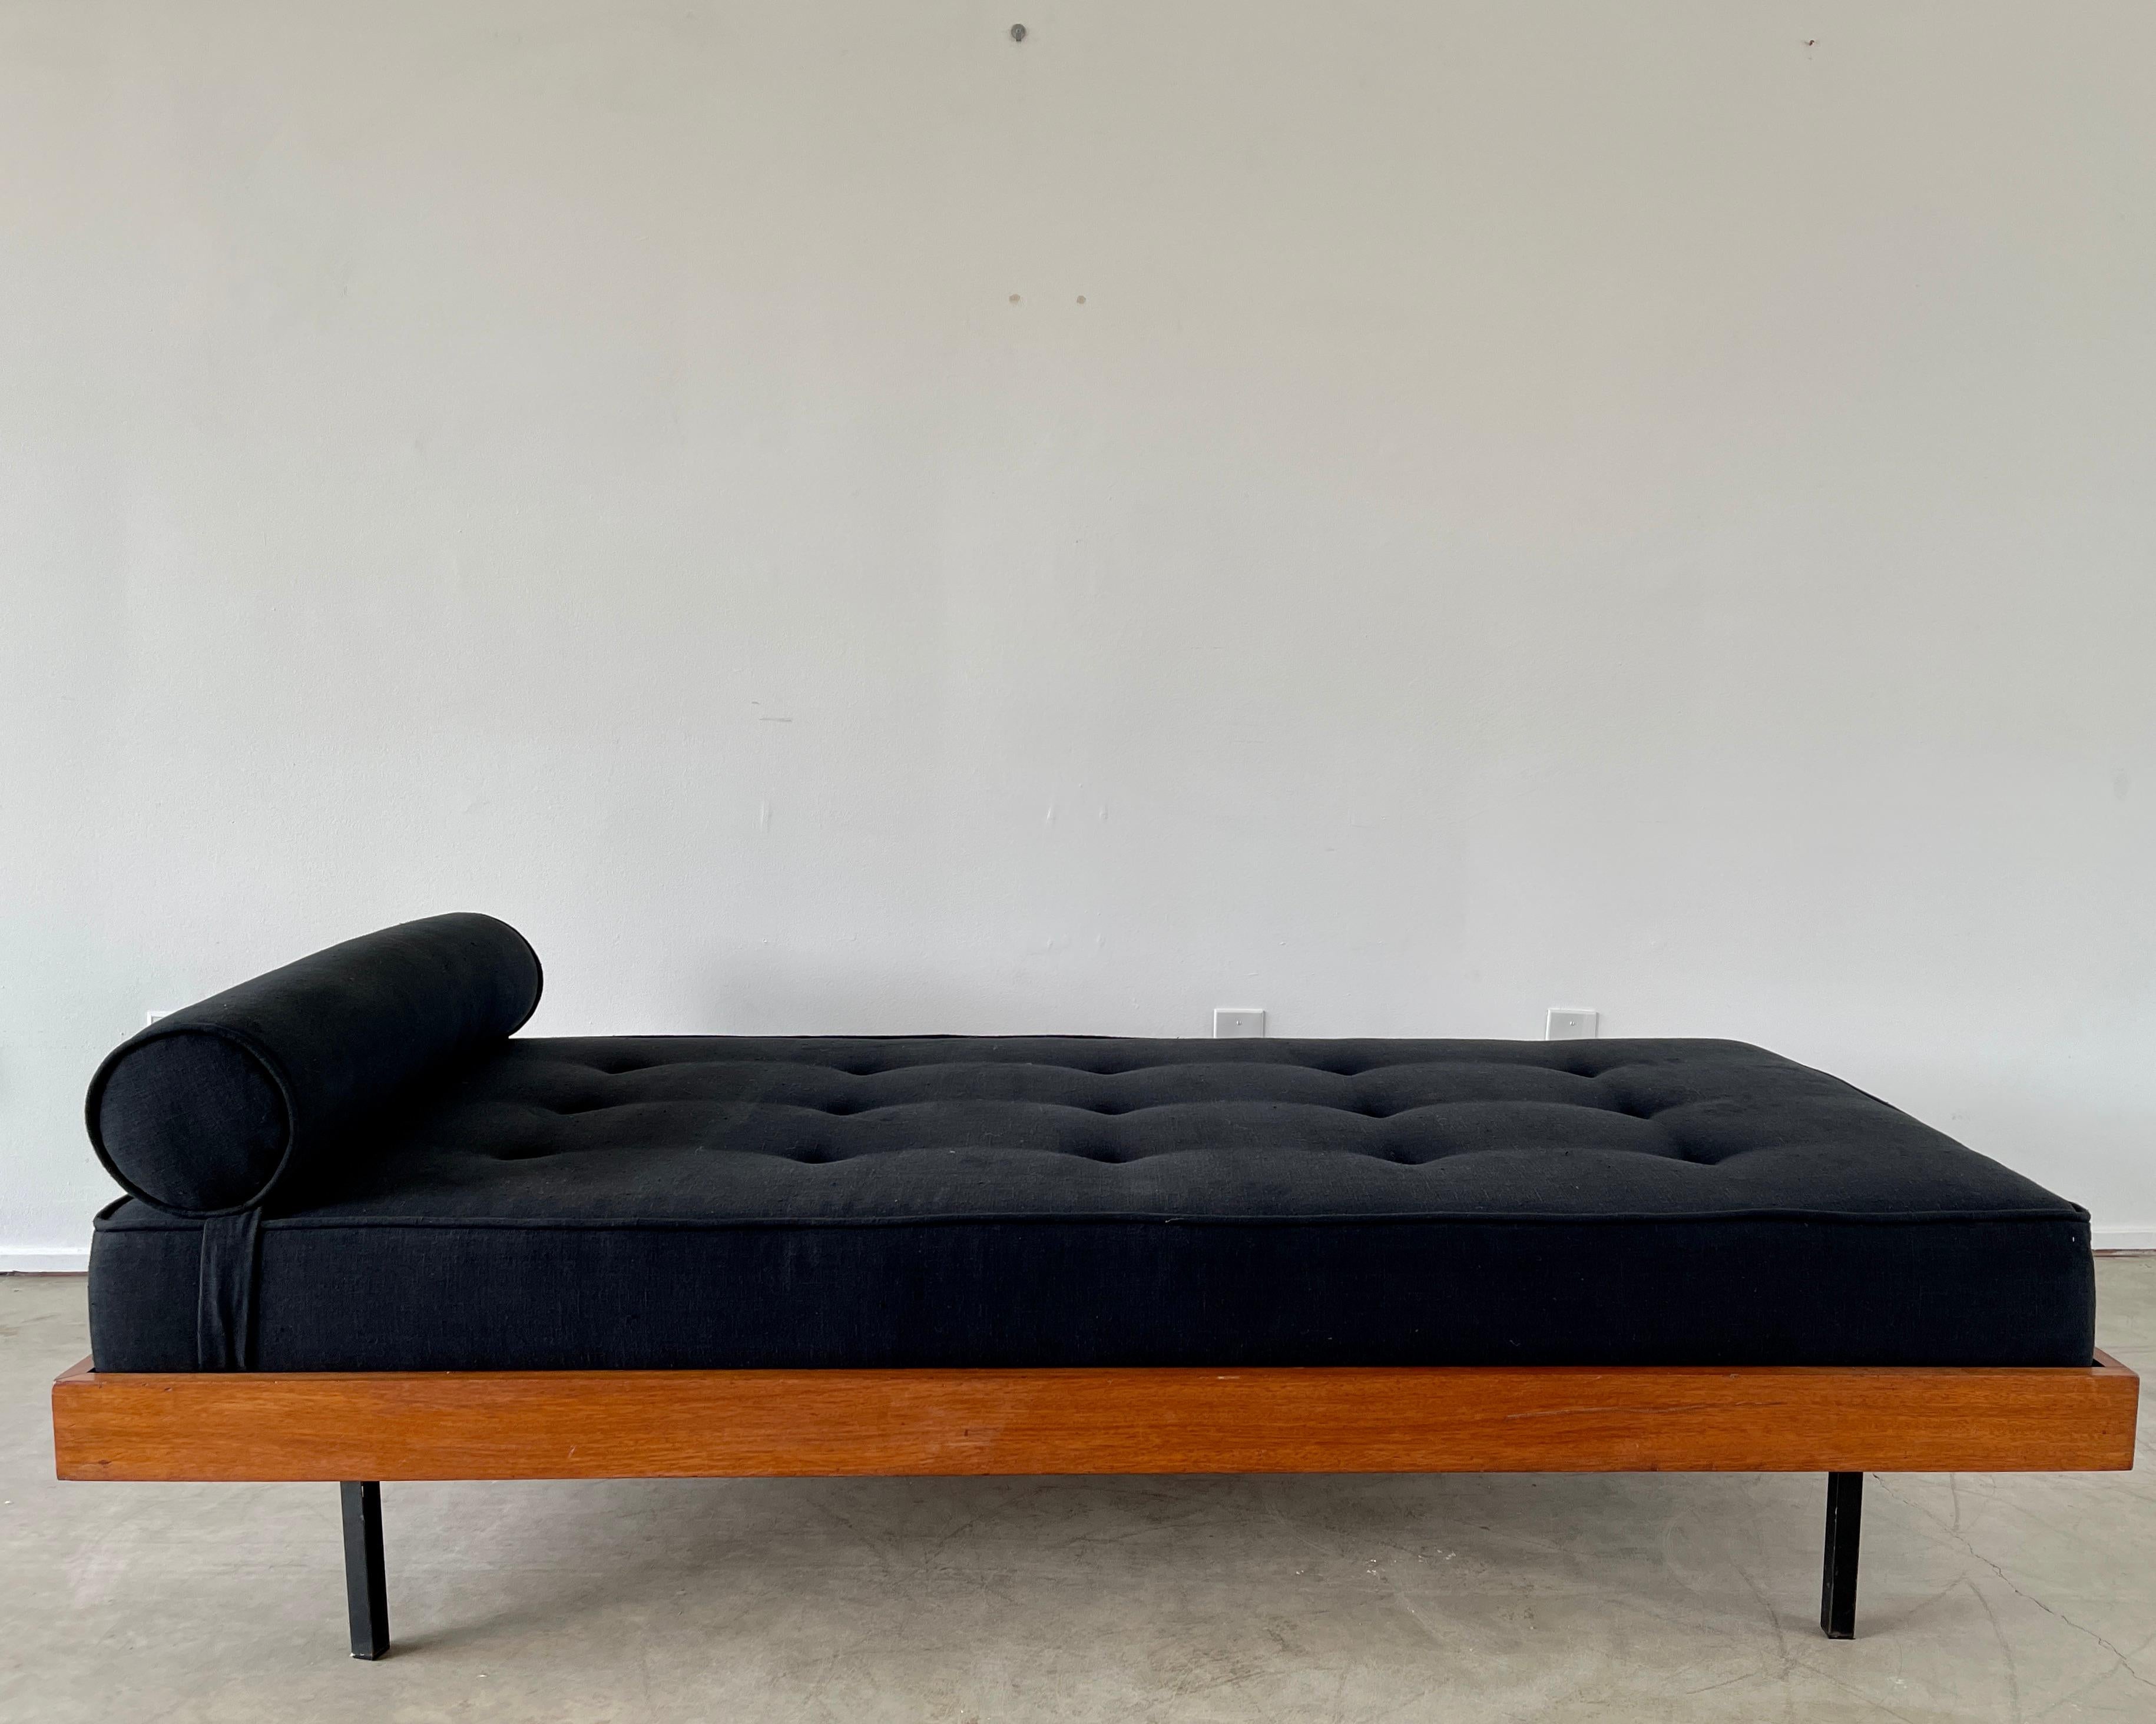 1950's French daybed with mahogany wood frame, iron legs and new black linen upholstery. 
Simple Classic design.